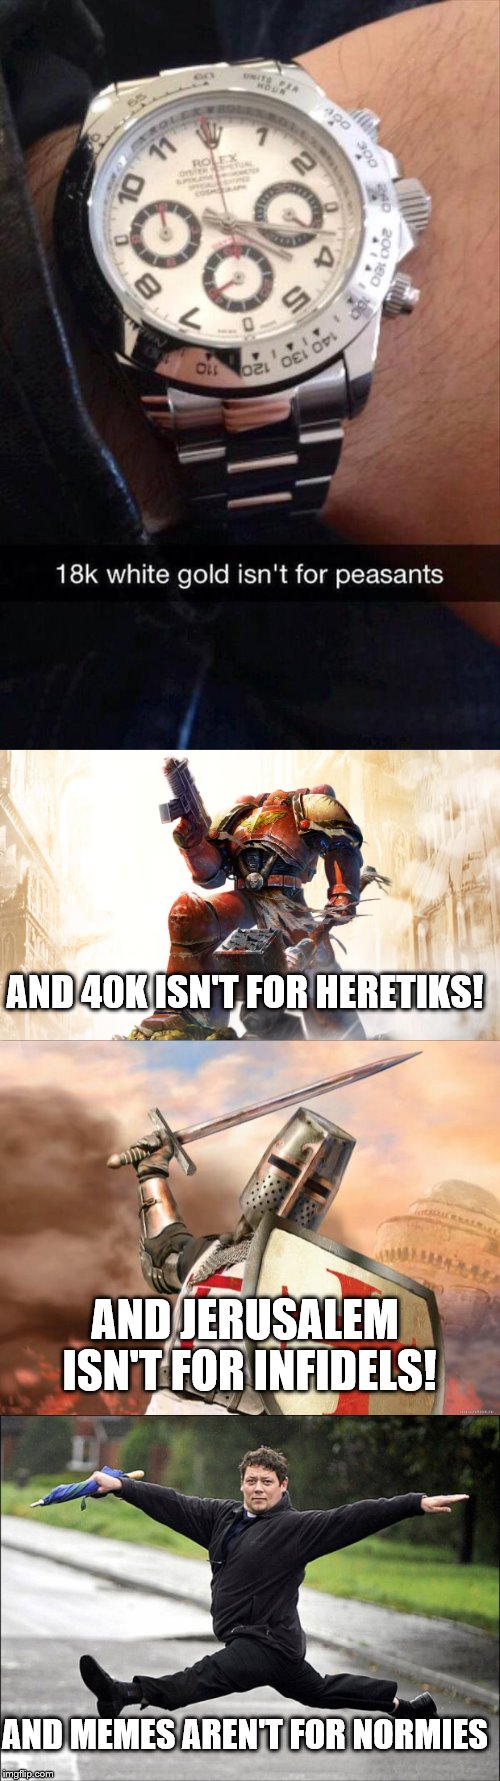 Warhammer 40k... Crusaders and Memes?! Just as holy as GARLICC BREADD | AND 40K ISN'T FOR HERETIKS! AND JERUSALEM ISN'T FOR INFIDELS! AND MEMES AREN'T FOR NORMIES | image tagged in meme,buggyleroast,rich kids,snapchat,warhammer 40k,deus vult | made w/ Imgflip meme maker